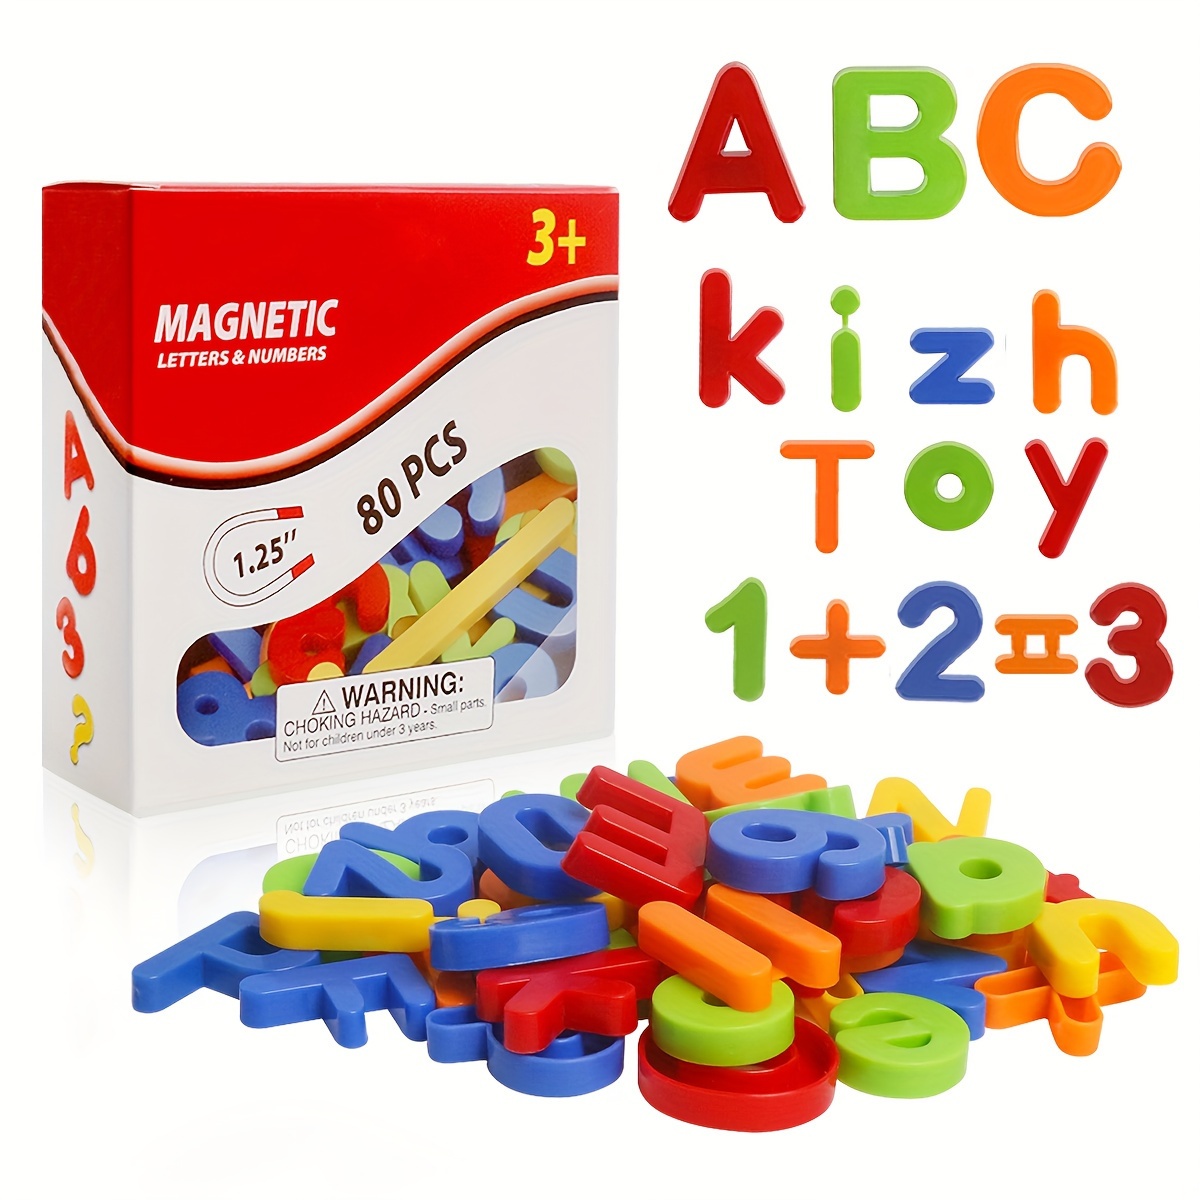 

Magnetic Letters And Numbers For Educating Kids Plastic Alphabet Fridge Magnets Abc Words Numbers Educational Learning Toys Spelling Counting Uppercase Lowercase ( 80pcs ), Halloween, Christmas Gift